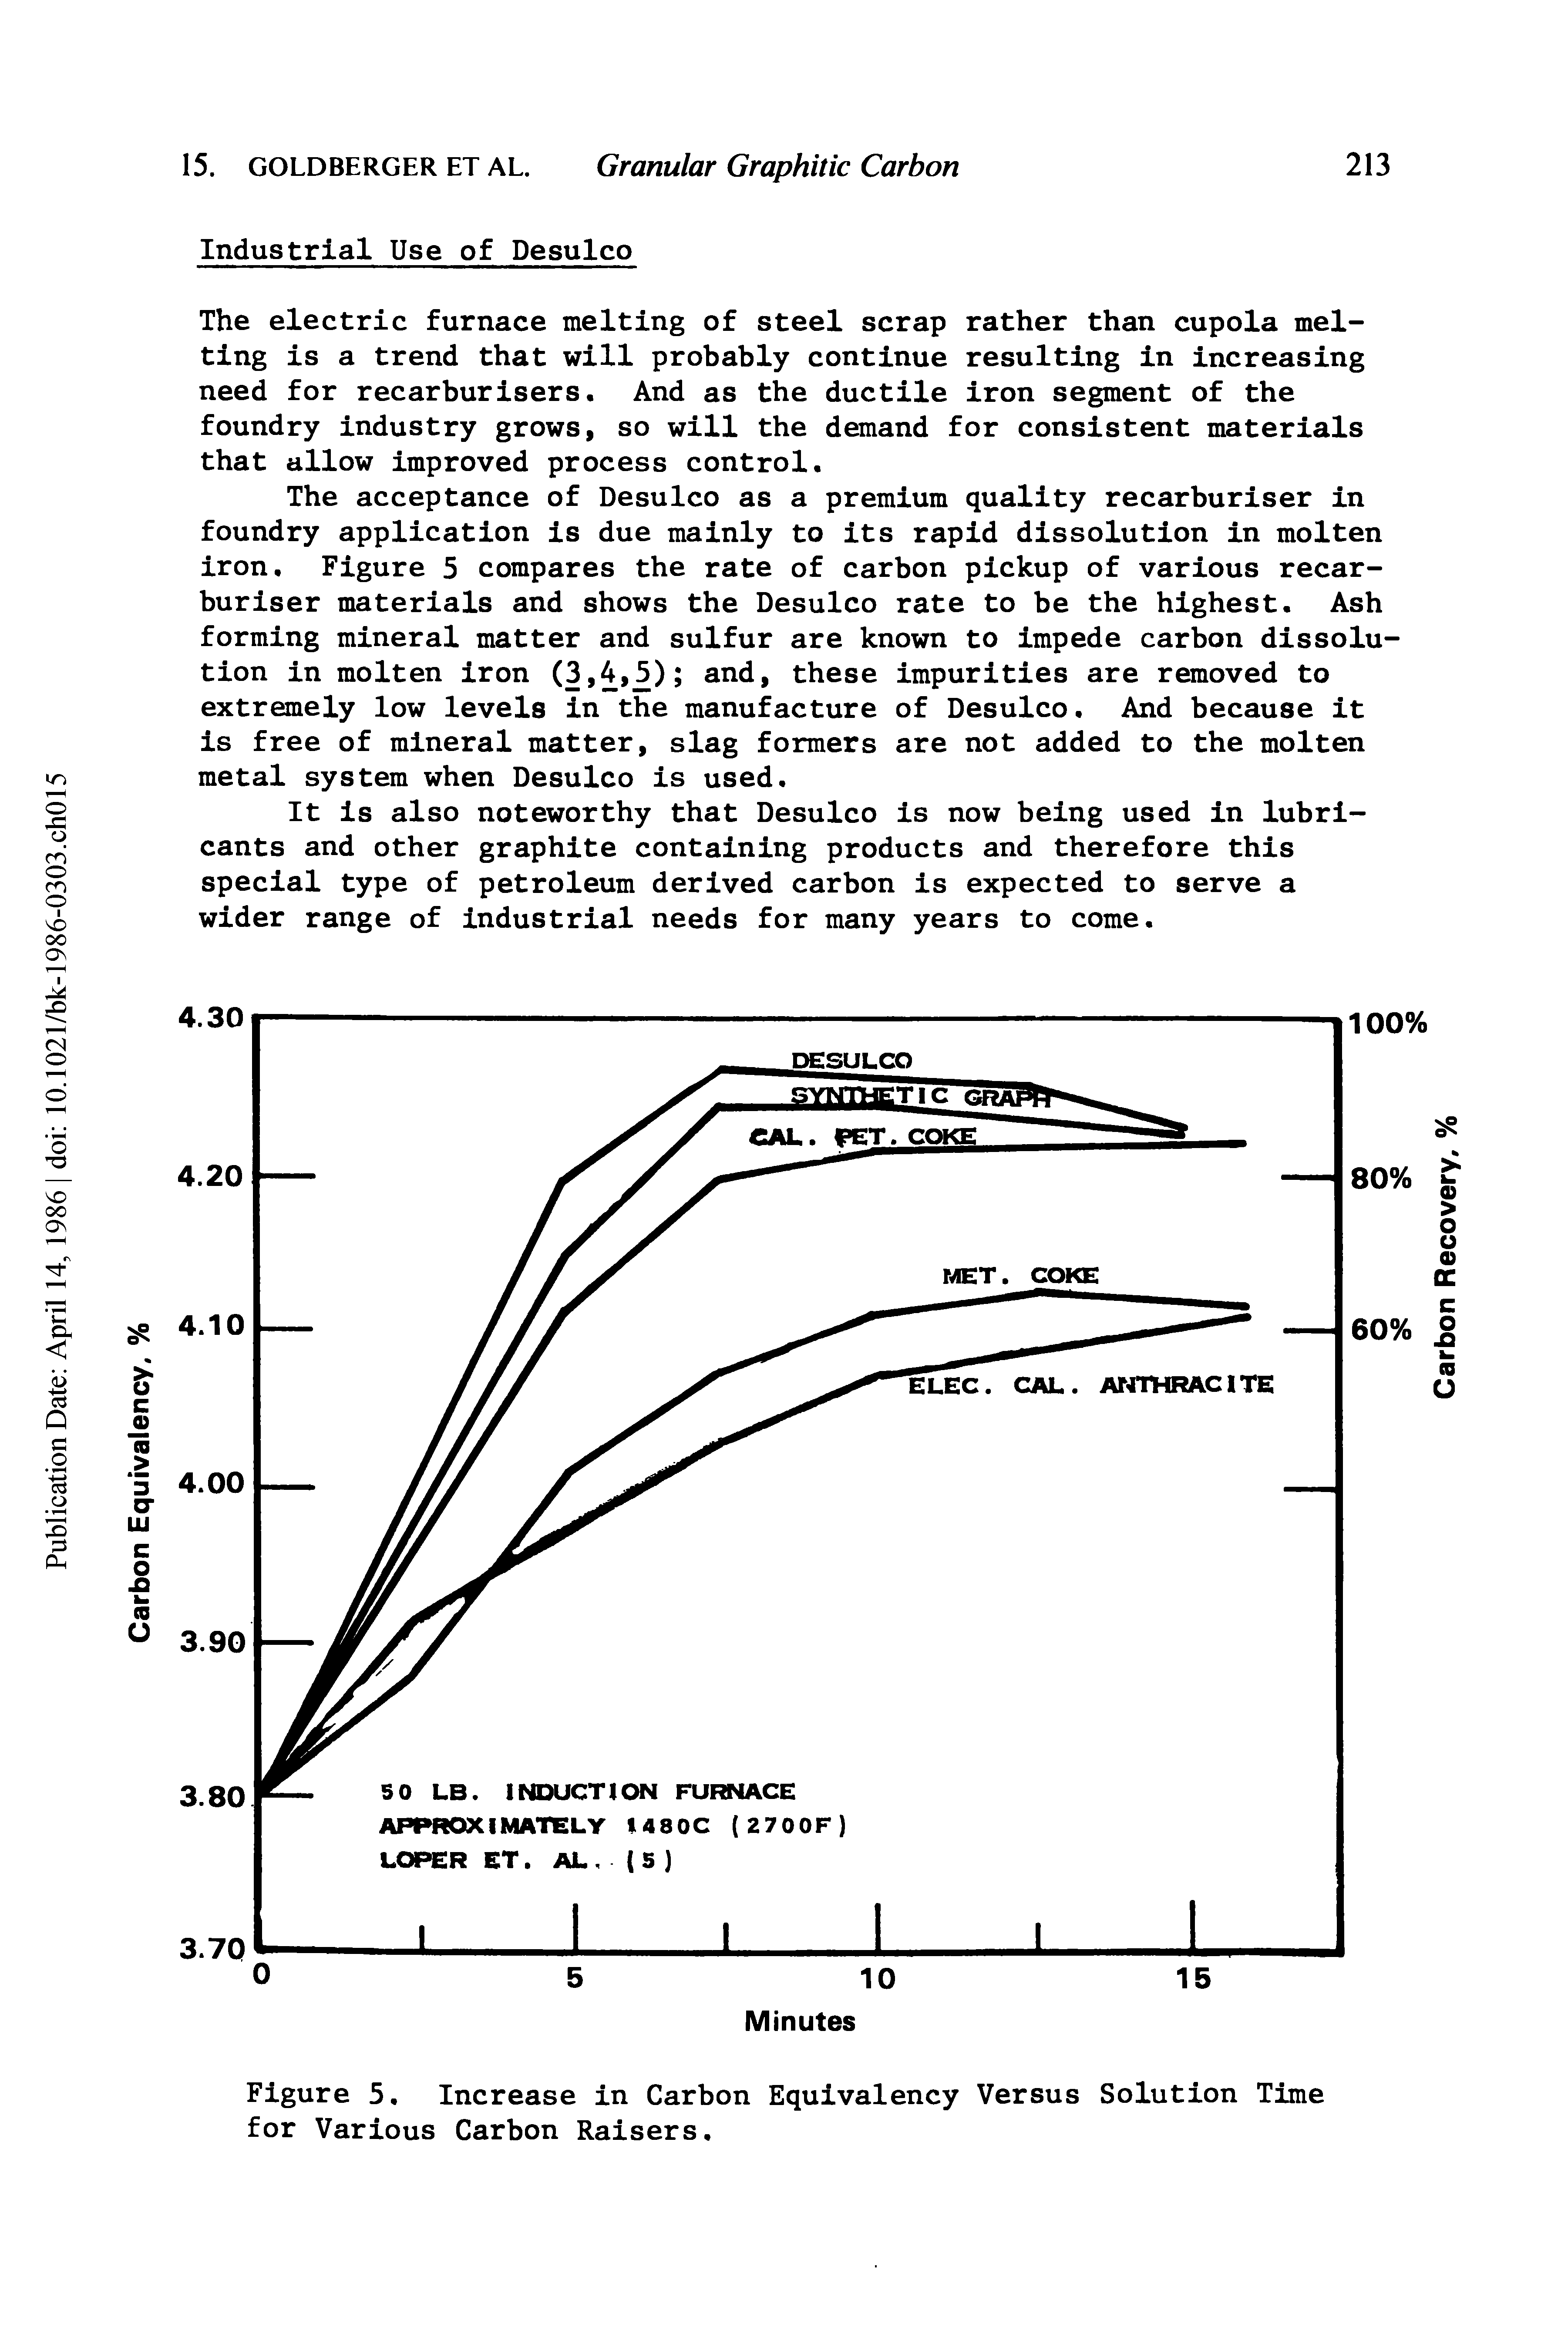 Figure 5. Increase in Carbon Equivalency Versus Solution Time for Various Carbon Raisers.